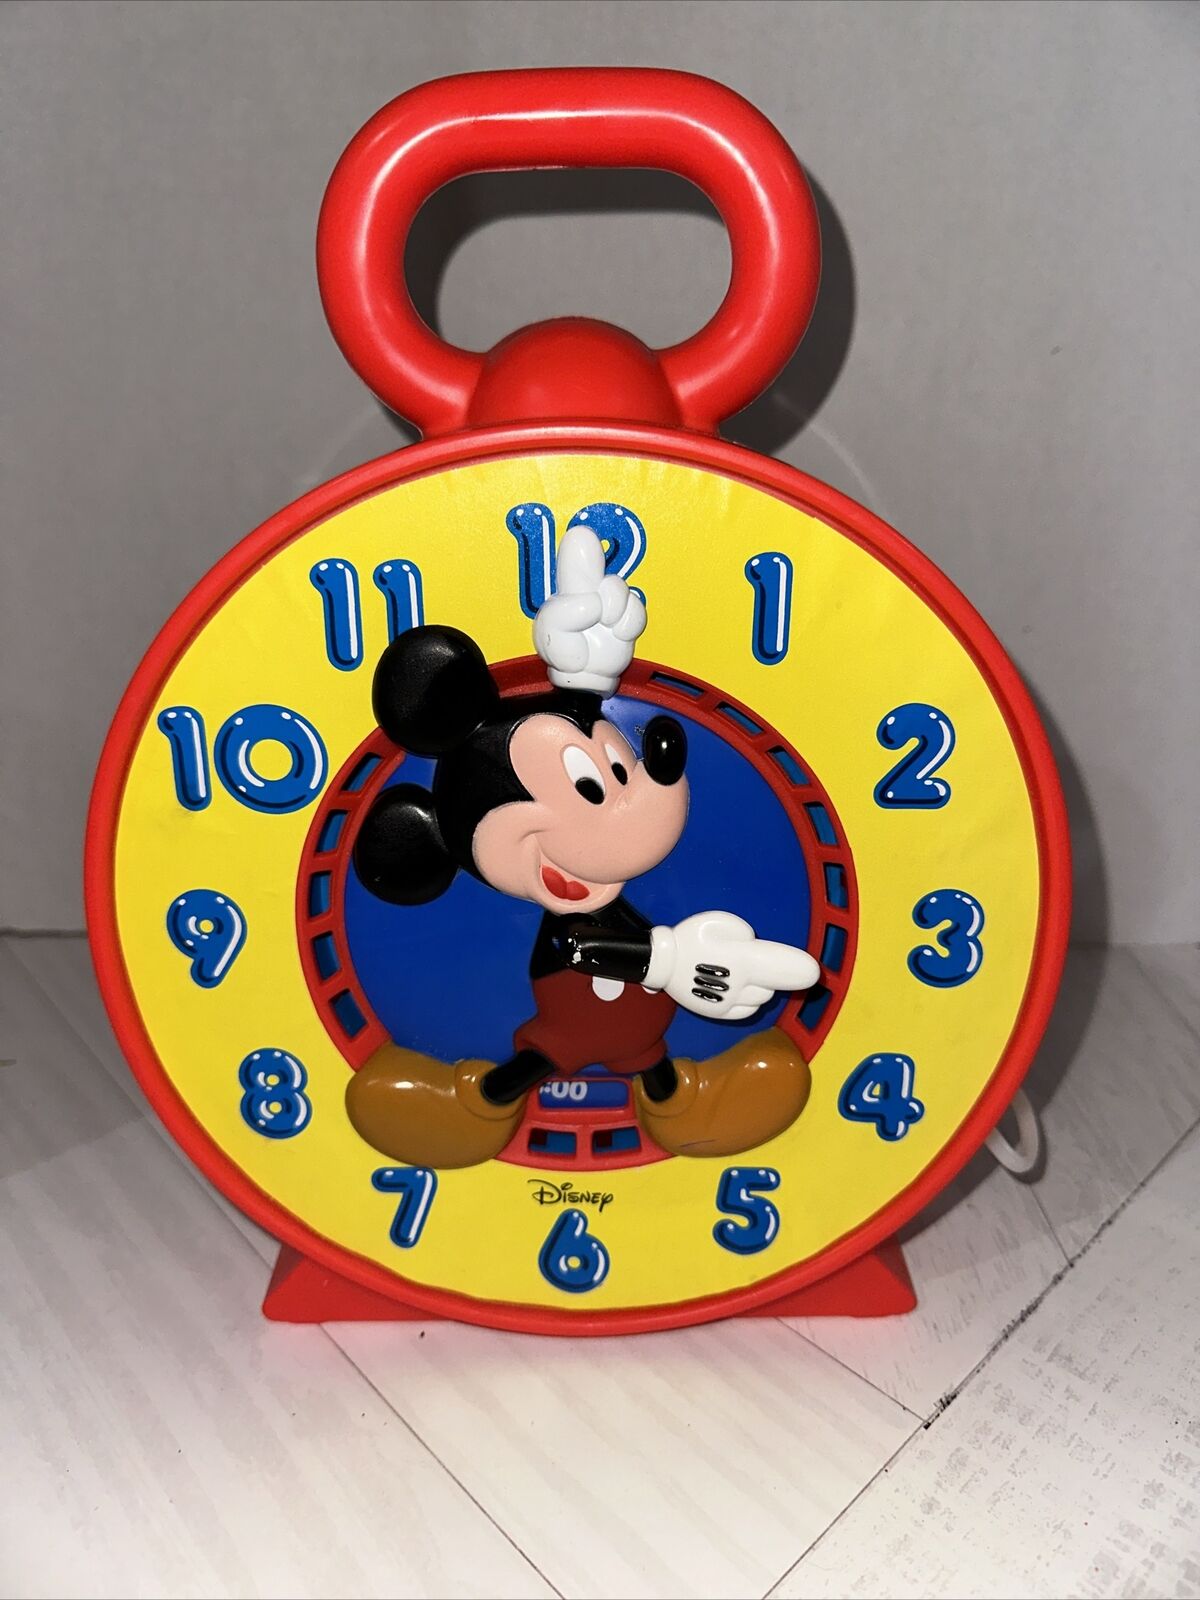 Vintage 1981 Disney Mickey Mouse  Chatter Clock with pull string toy Mattel